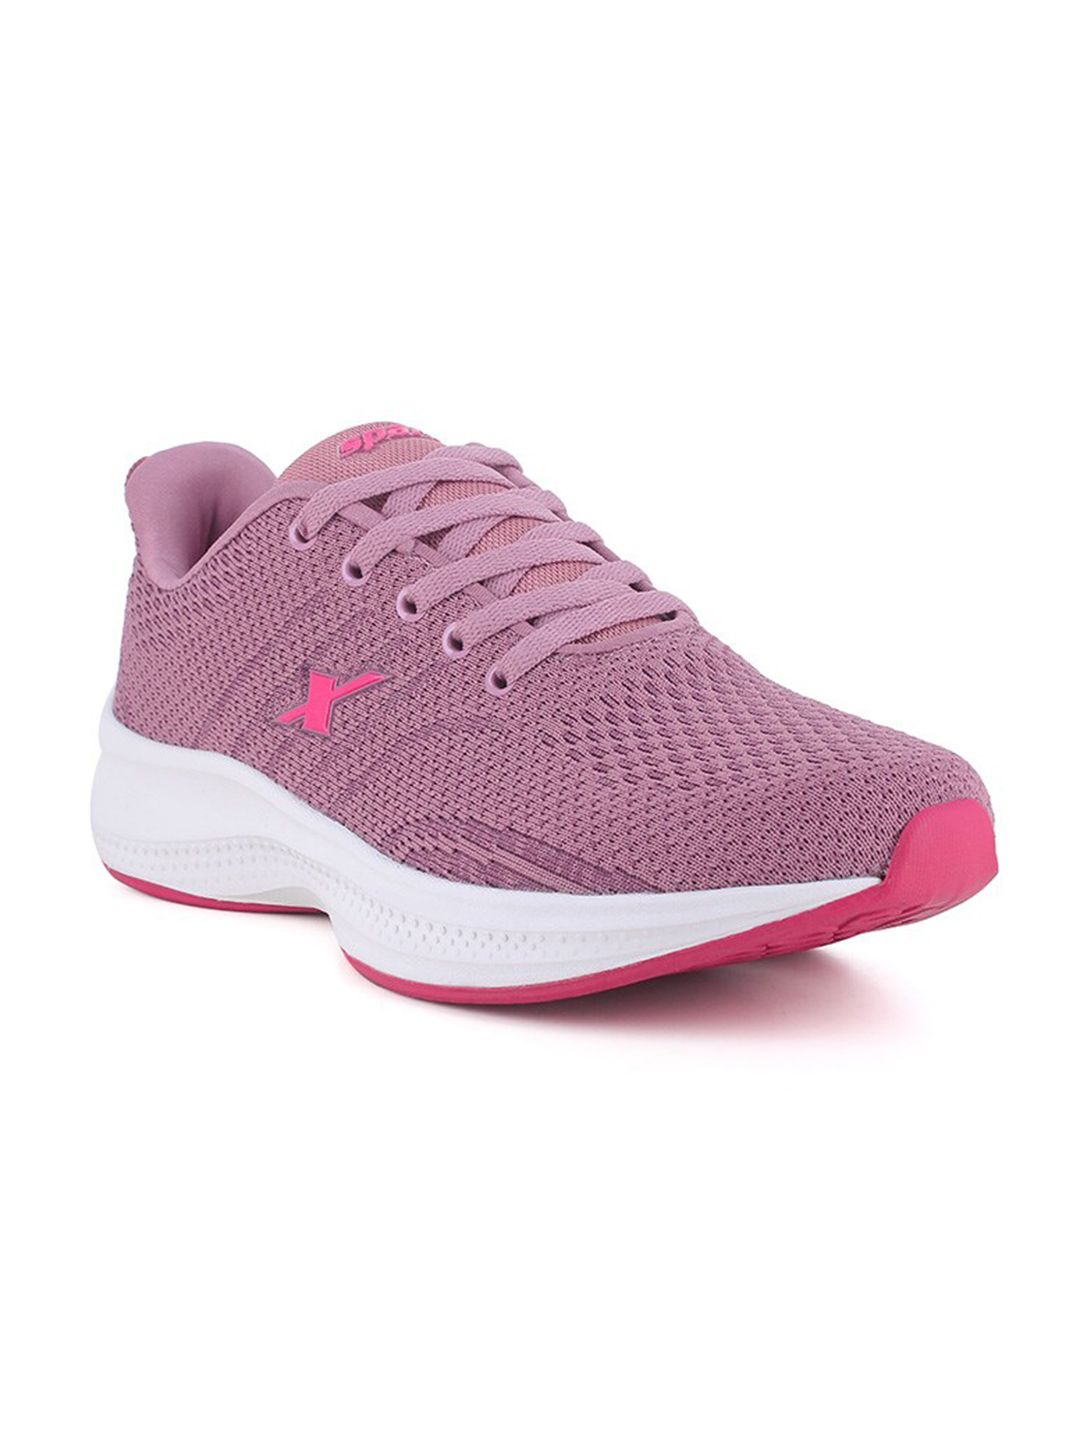 Sparx Women Magenta Textile Running Non-Marking Shoes Price in India